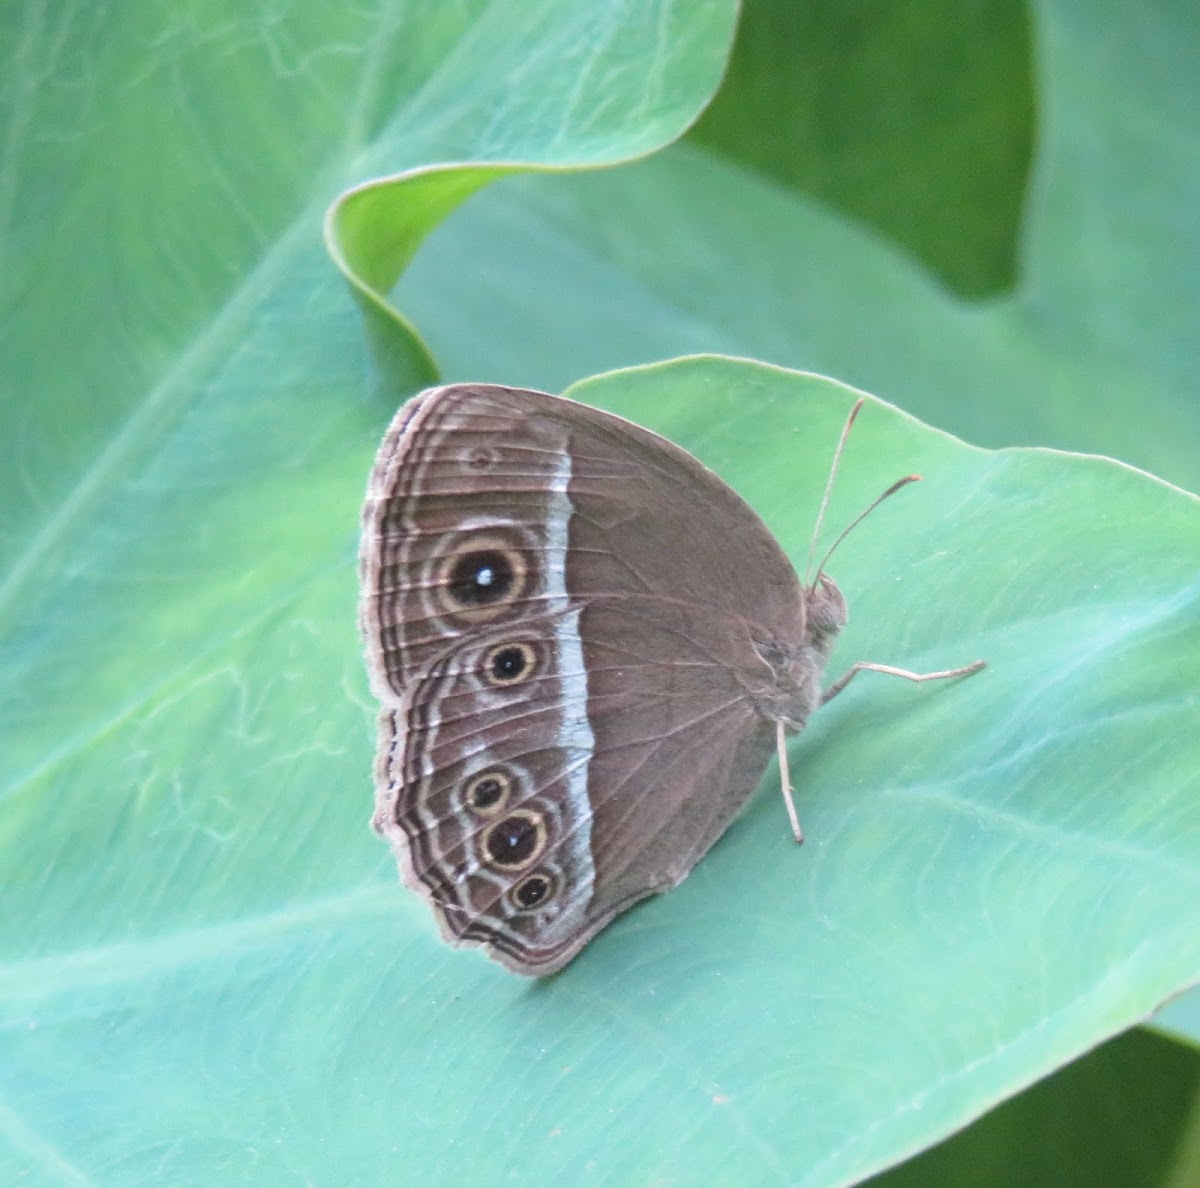 Bushbrown Butterfly